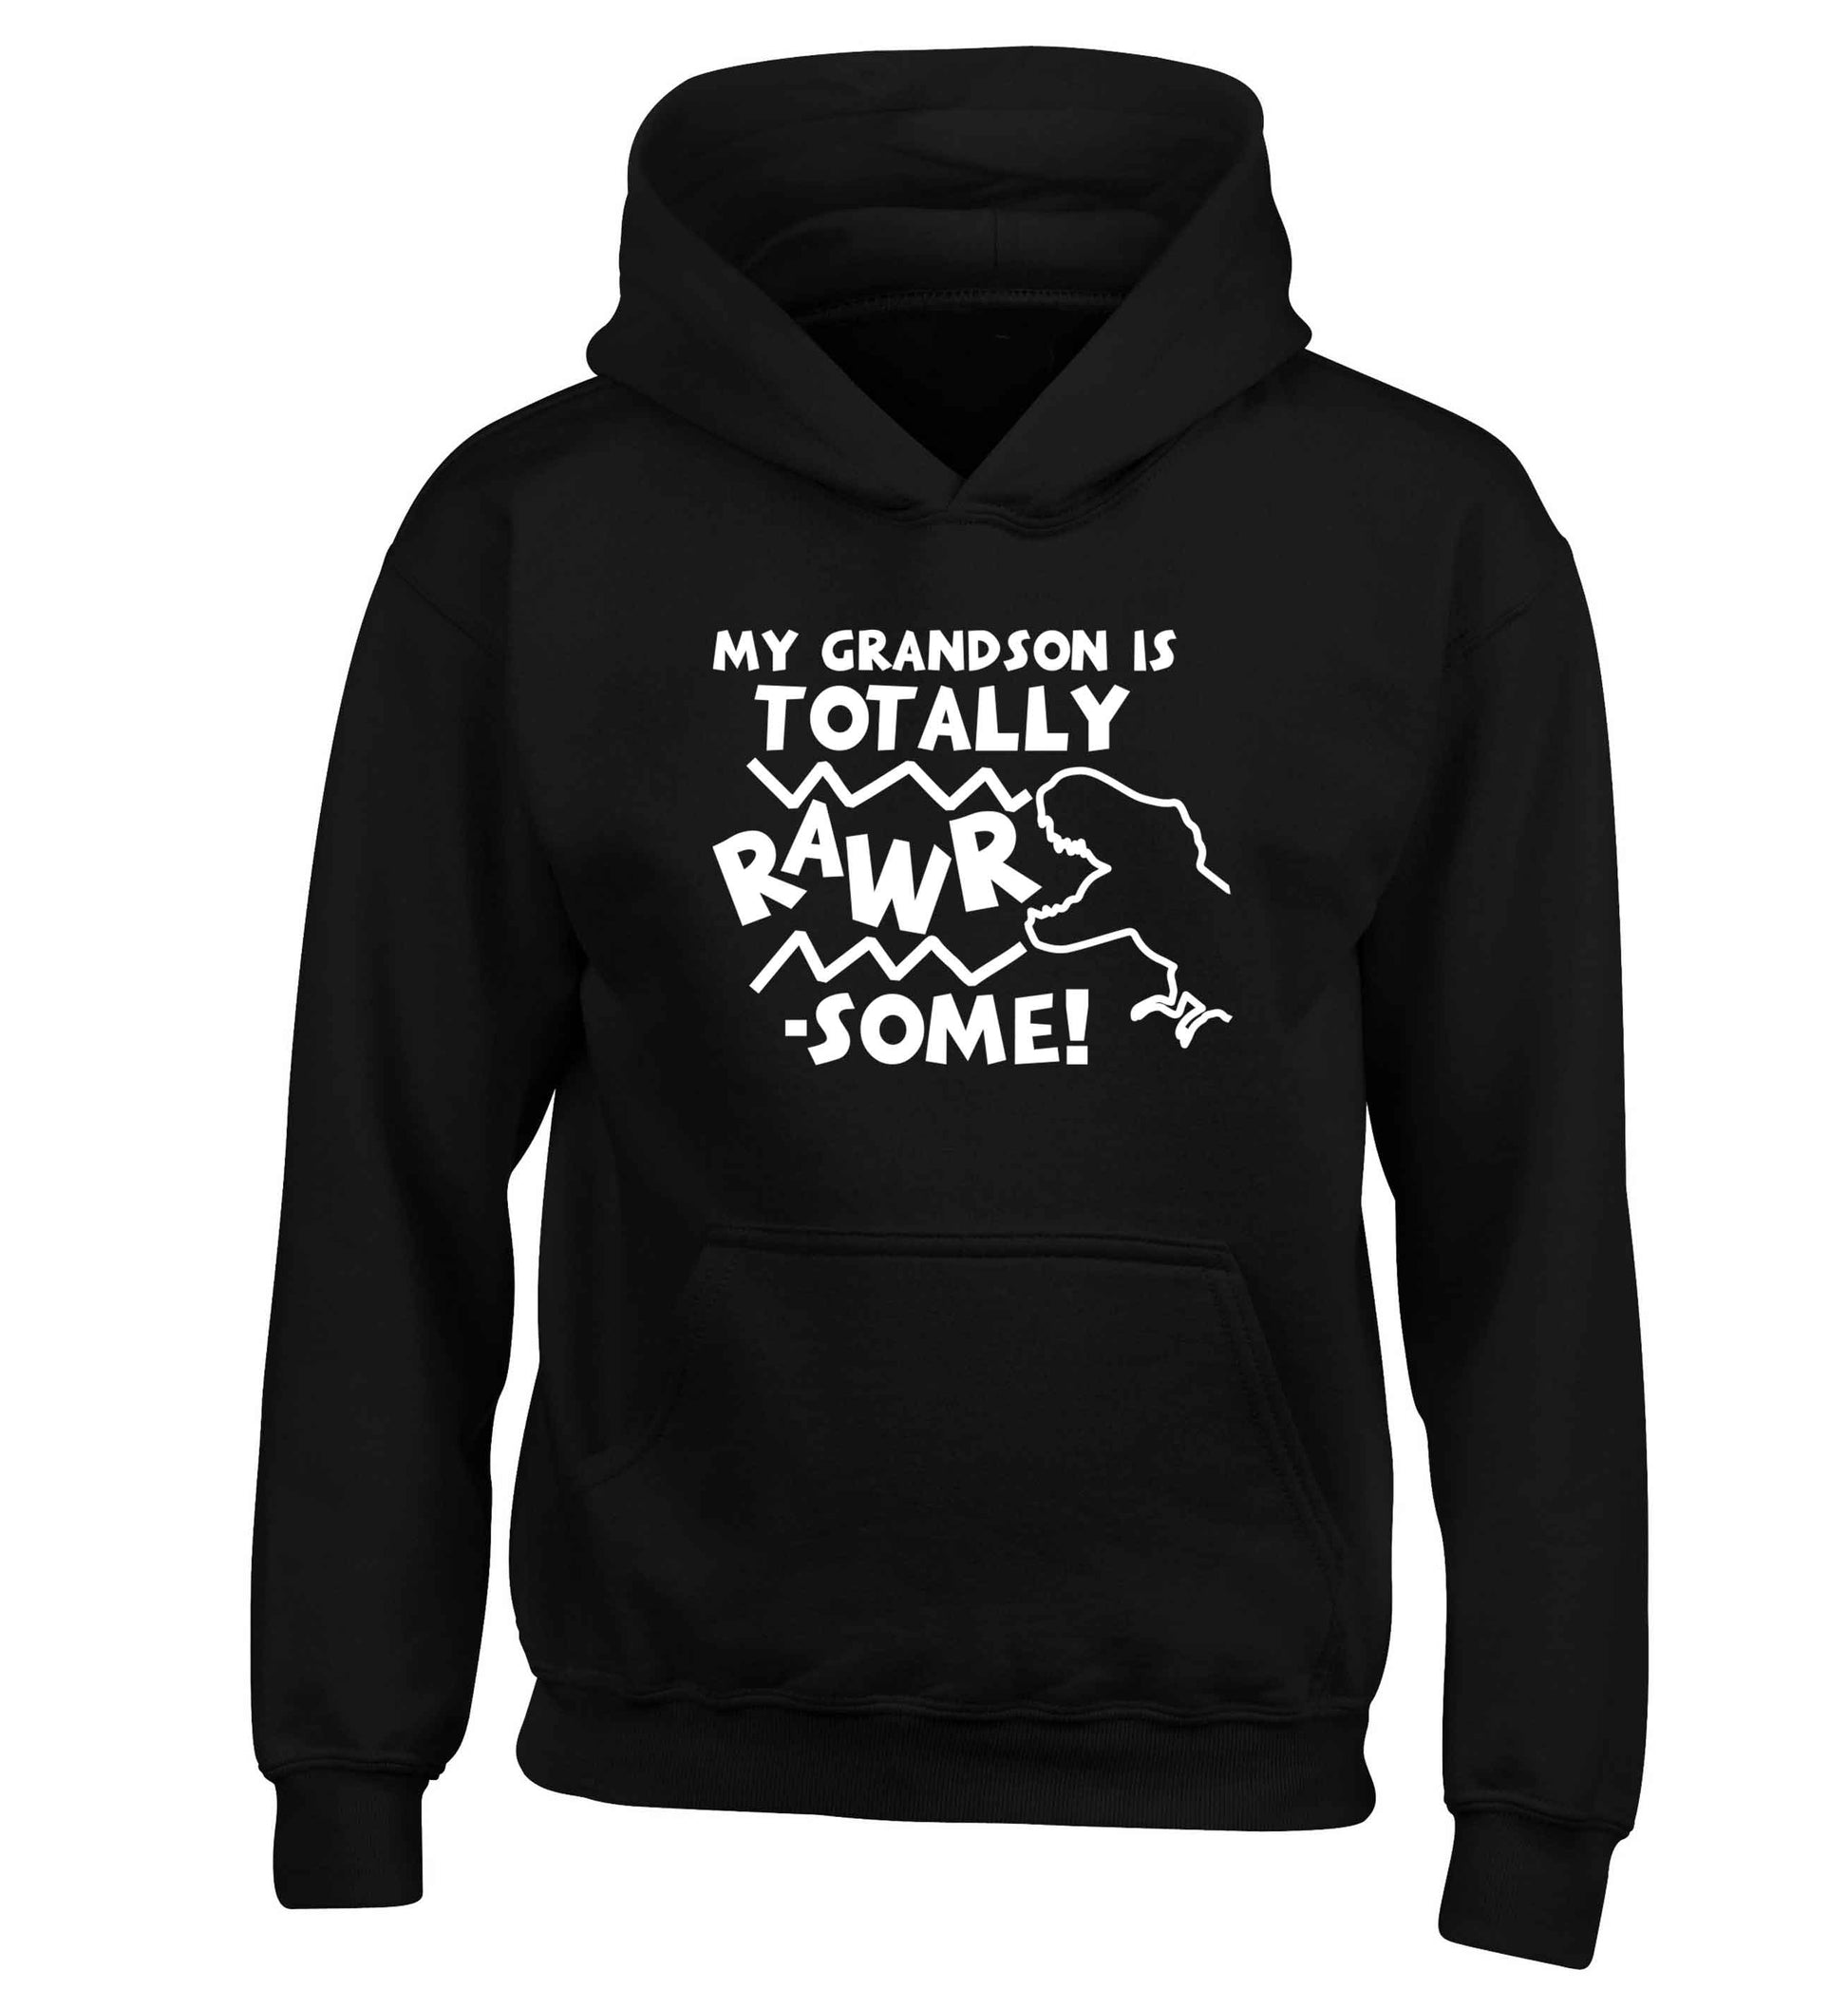 My grandson is totally rawrsome children's black hoodie 12-13 Years